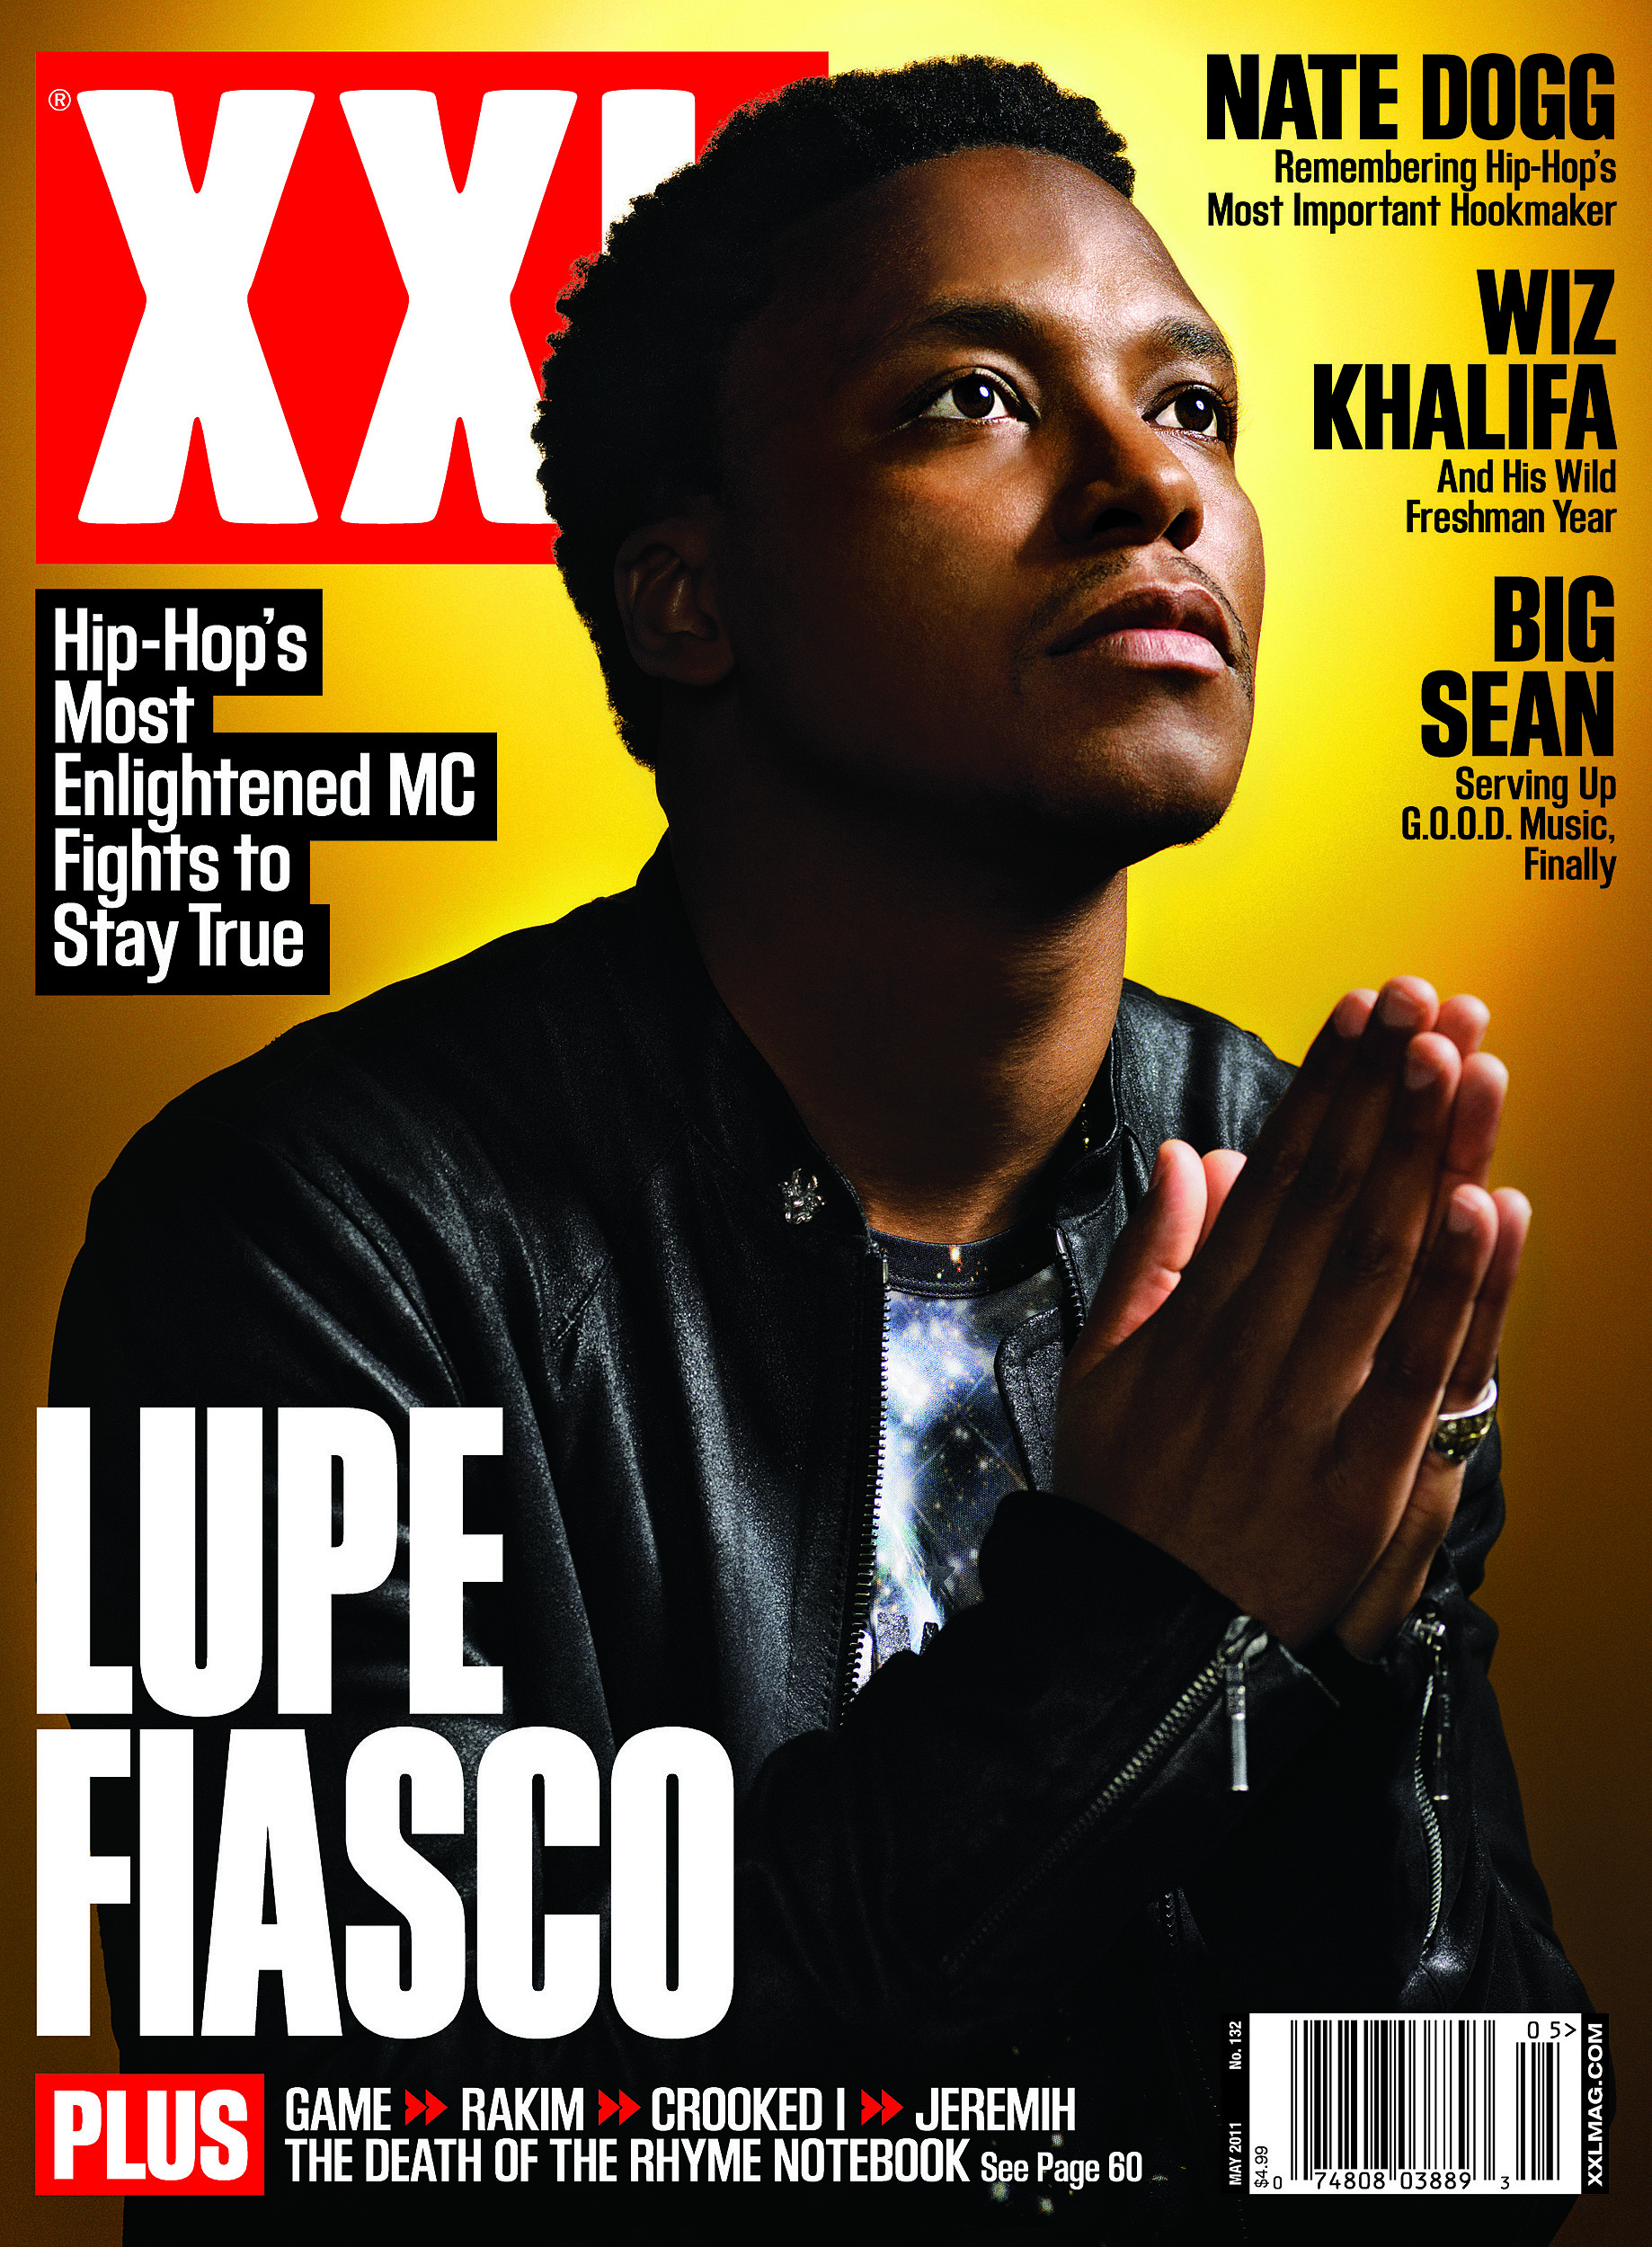 https://townsquare.media/site/812/files/2019/12/132-May-Lupe-Fiasco.jpg